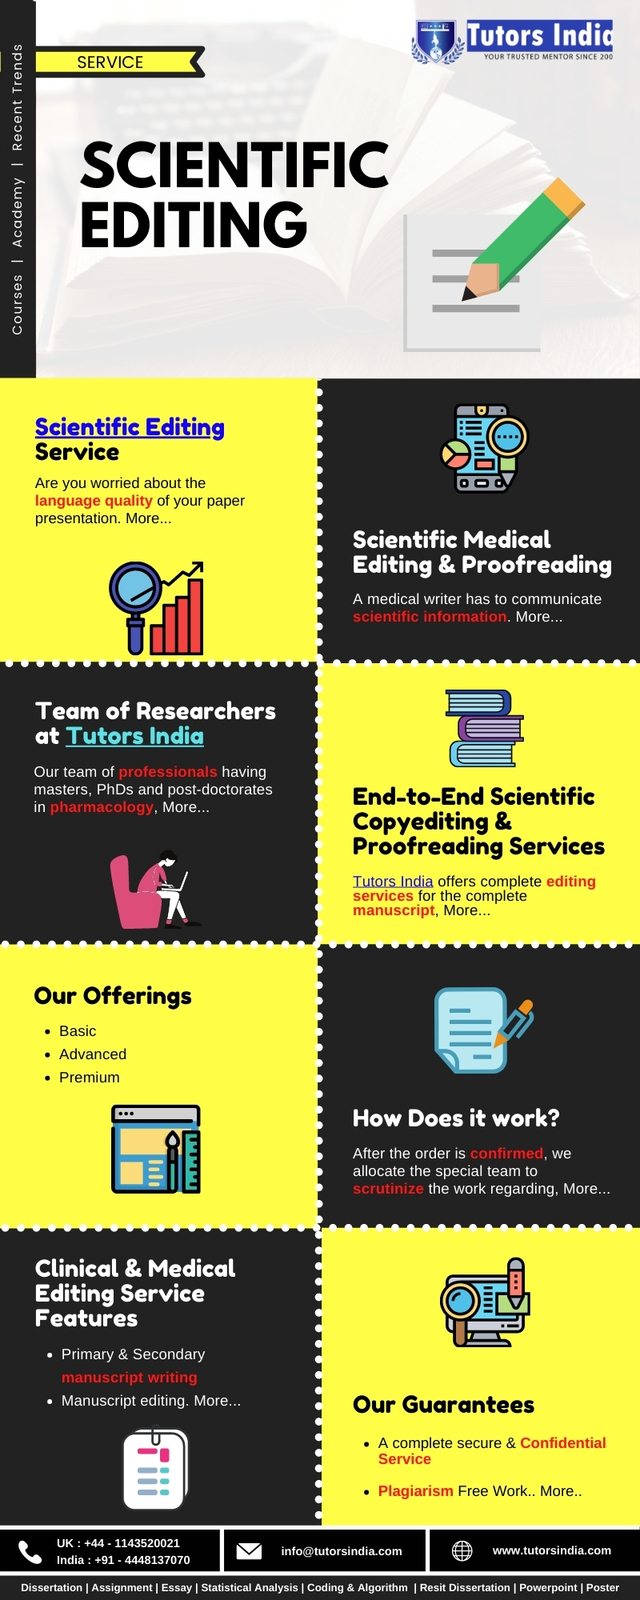 Scientific Editing Services For Research and Academic Paper